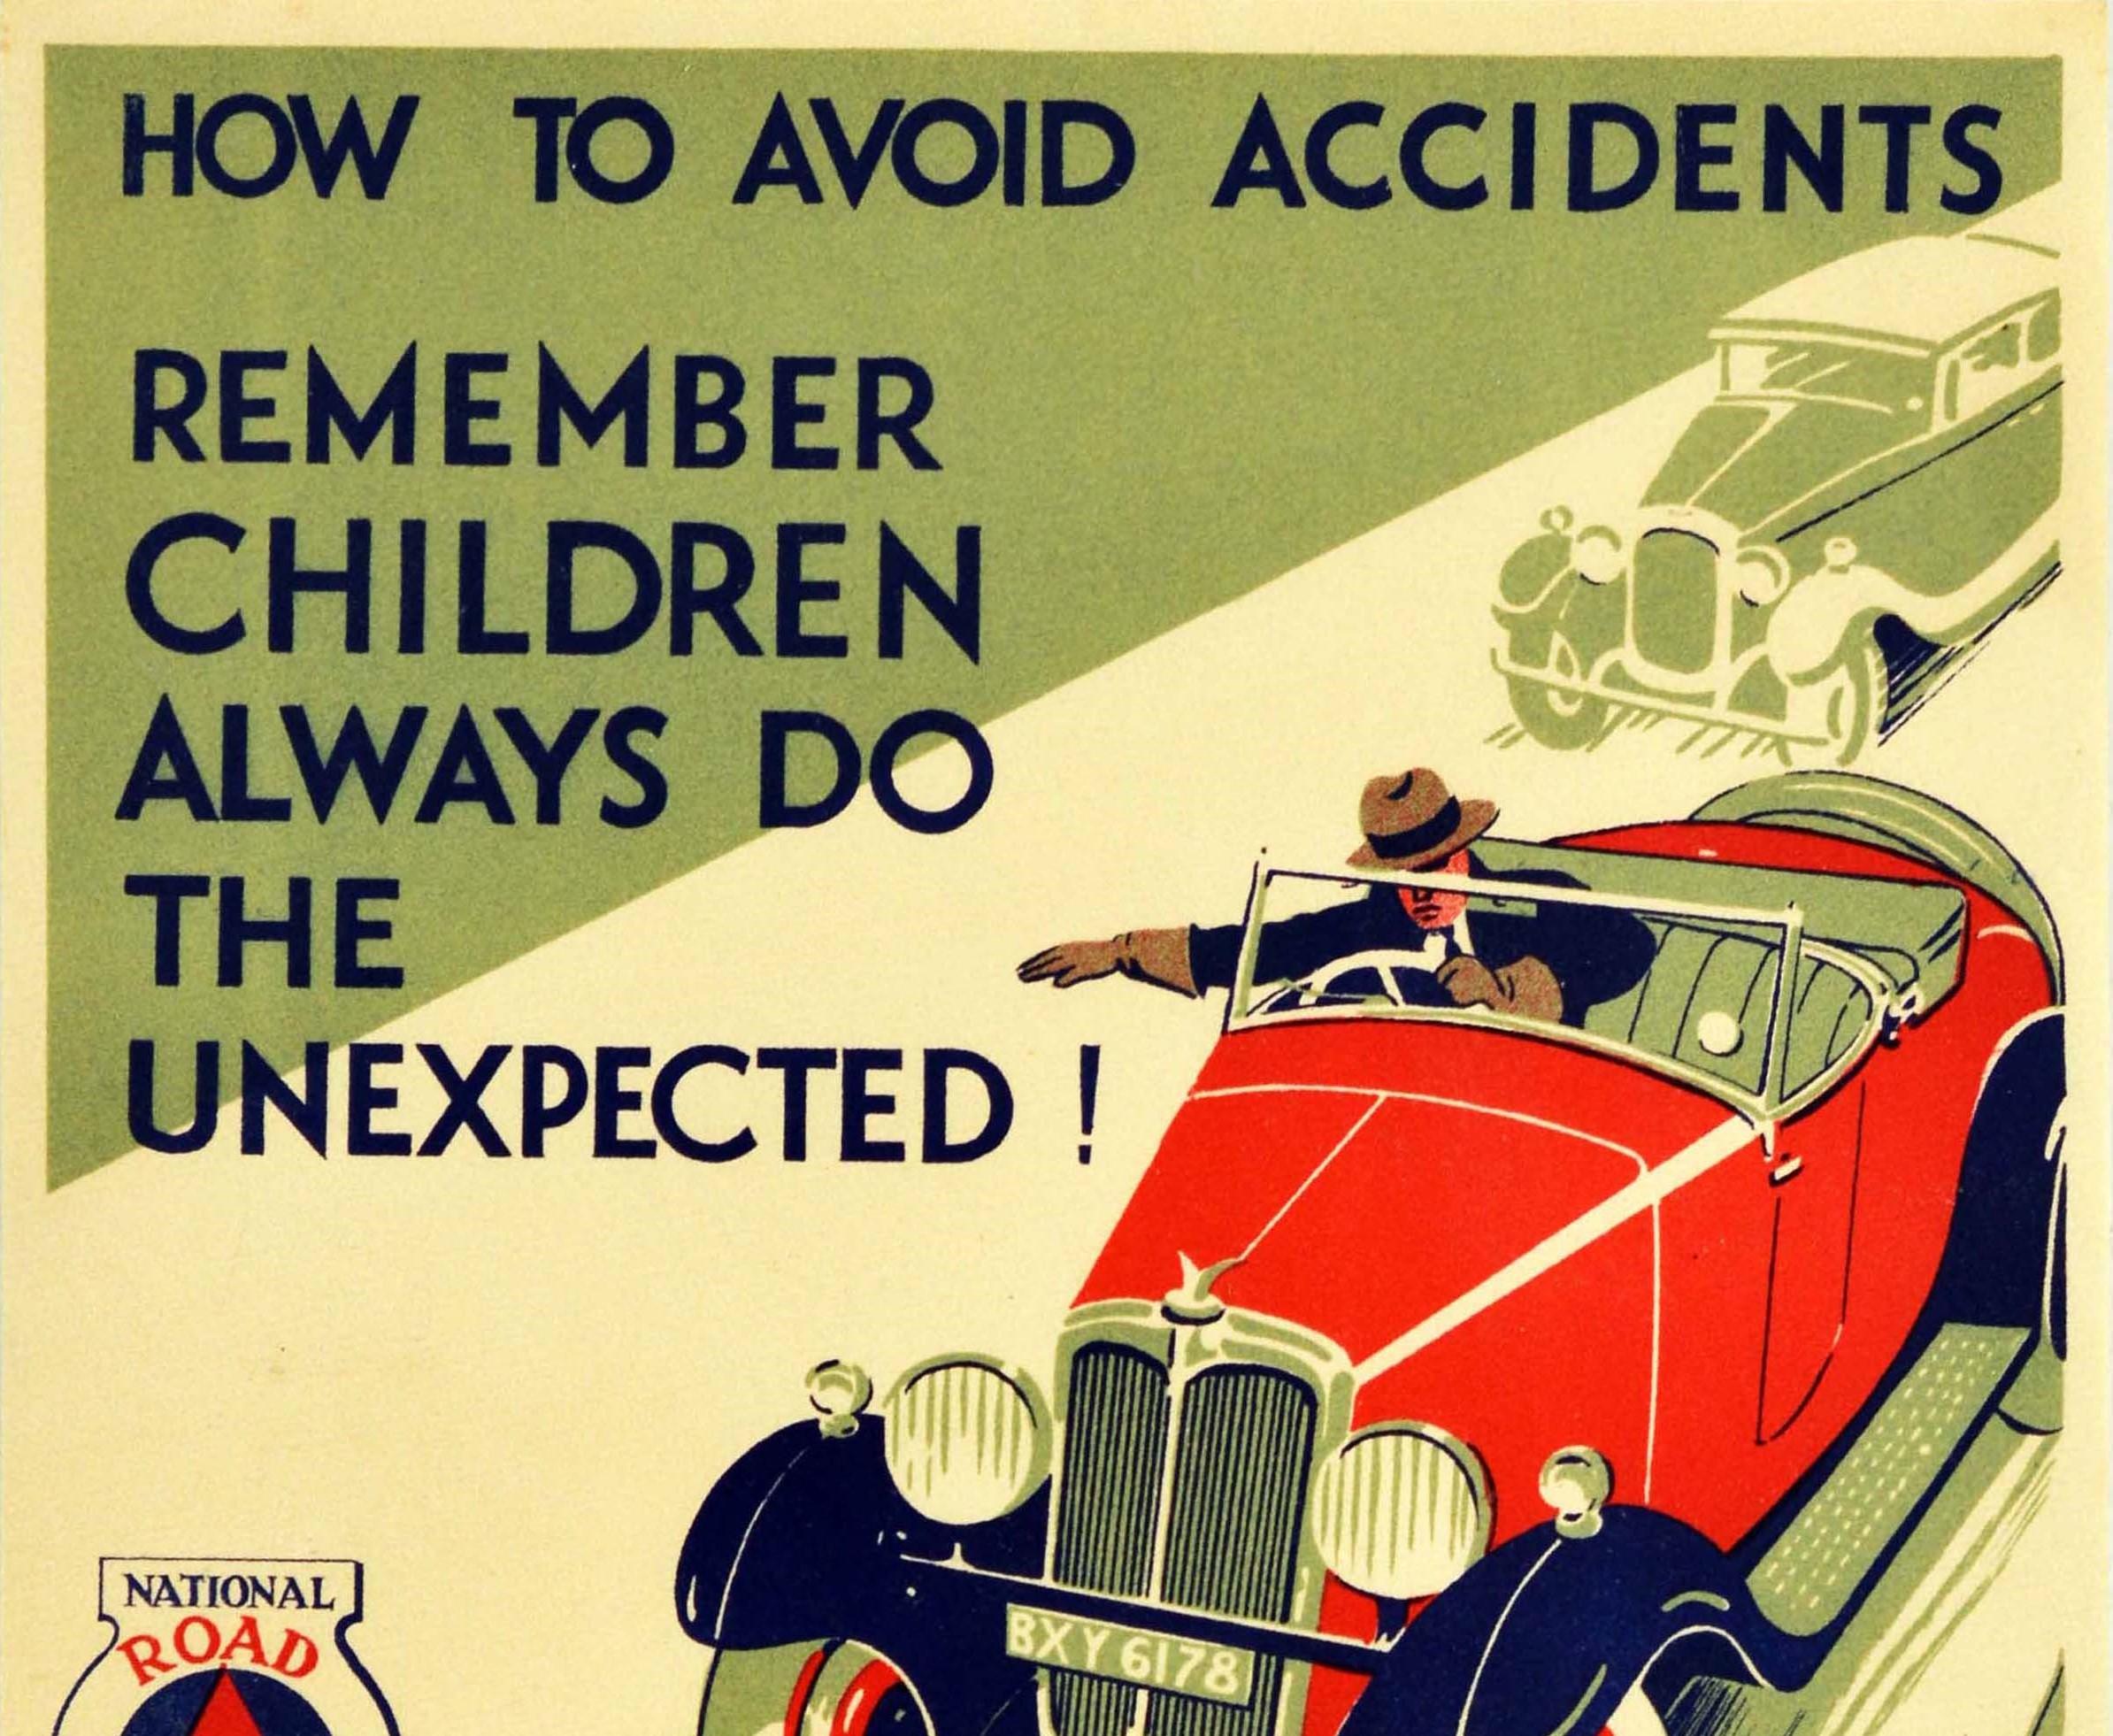 Original vintage road safety poster for the National Road Safety Campaign issued by the National Safety First Association (Inc) - How To Avoid Accidents Remember Children Always Do The Unexpected! - showing a man driving an open-top red car, wearing